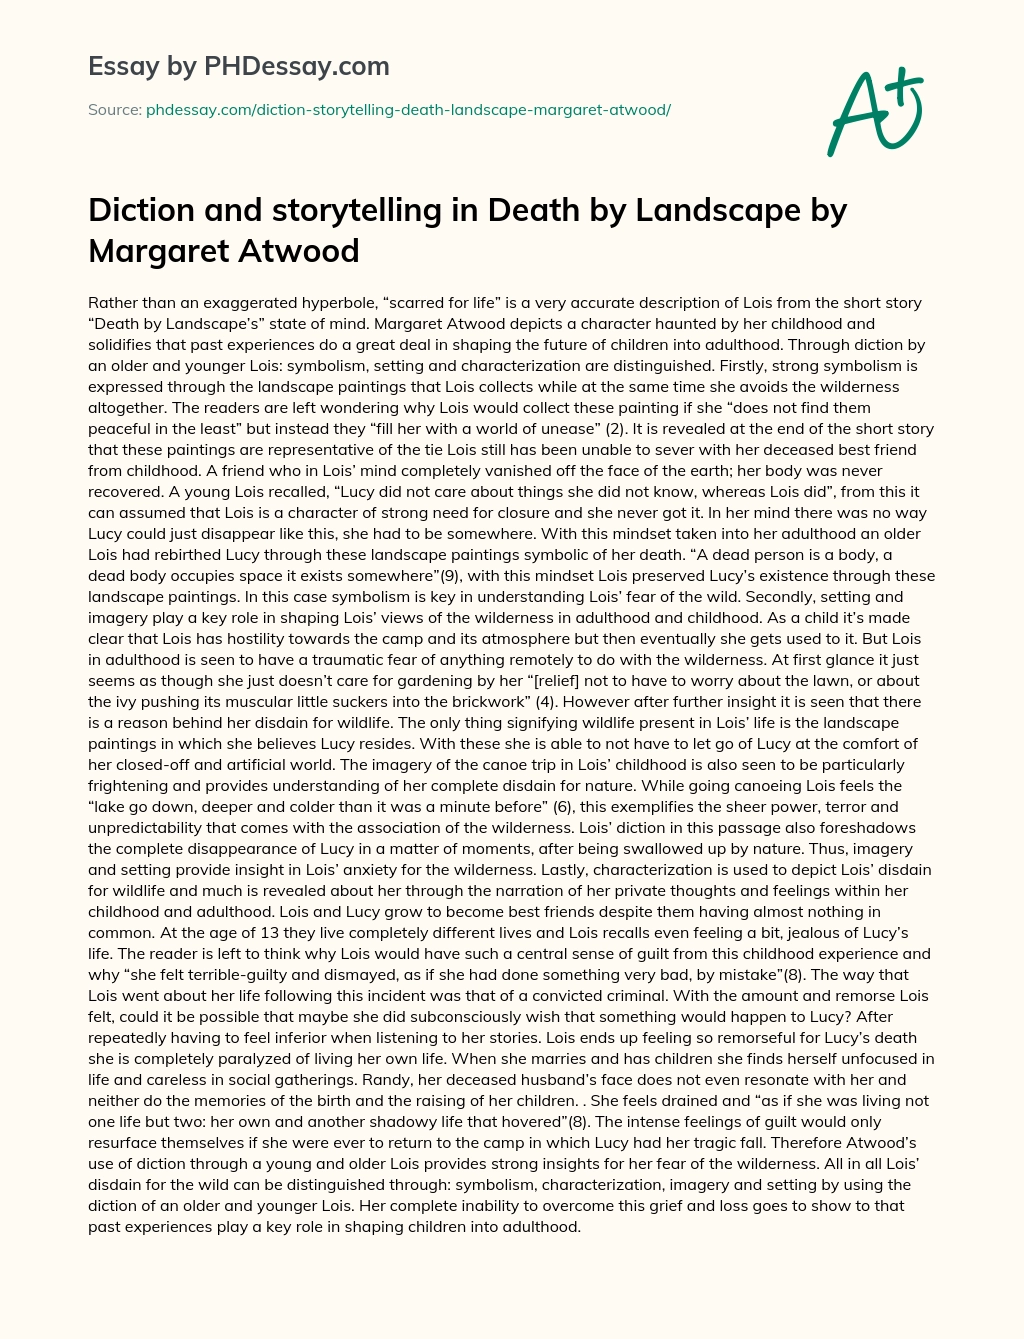 Diction and storytelling in Death by Landscape by Margaret Atwood essay